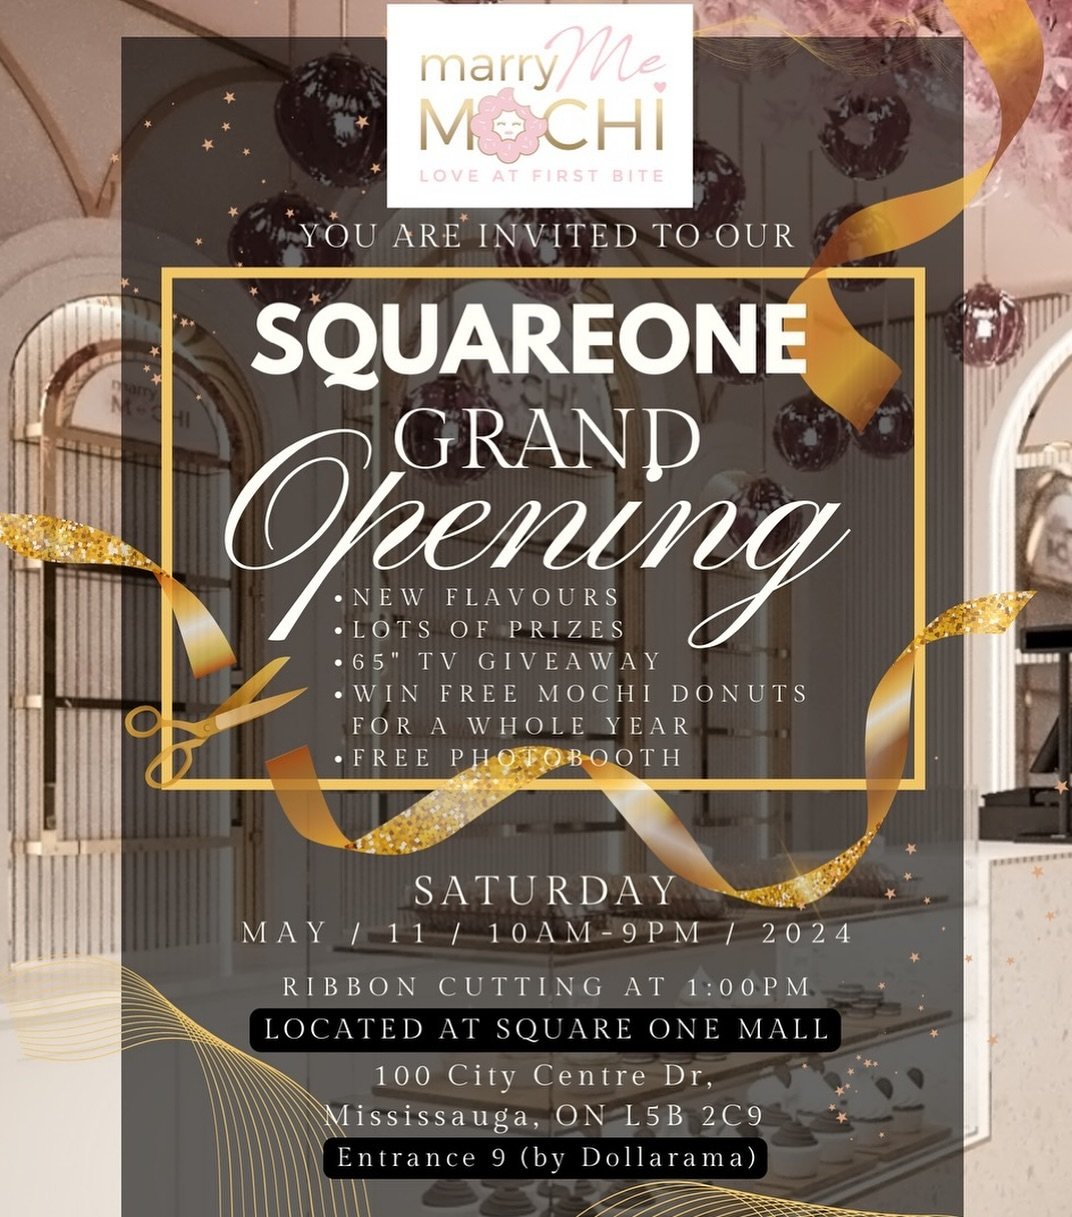 So excited to announce our Grand Opening for Square One! This one means a lot to us. To bring it back to where it all started is beyond a dream for us. 

We&rsquo;ll have a free photobooth to enjoy, new flavours, all our special drinks and viet coffe